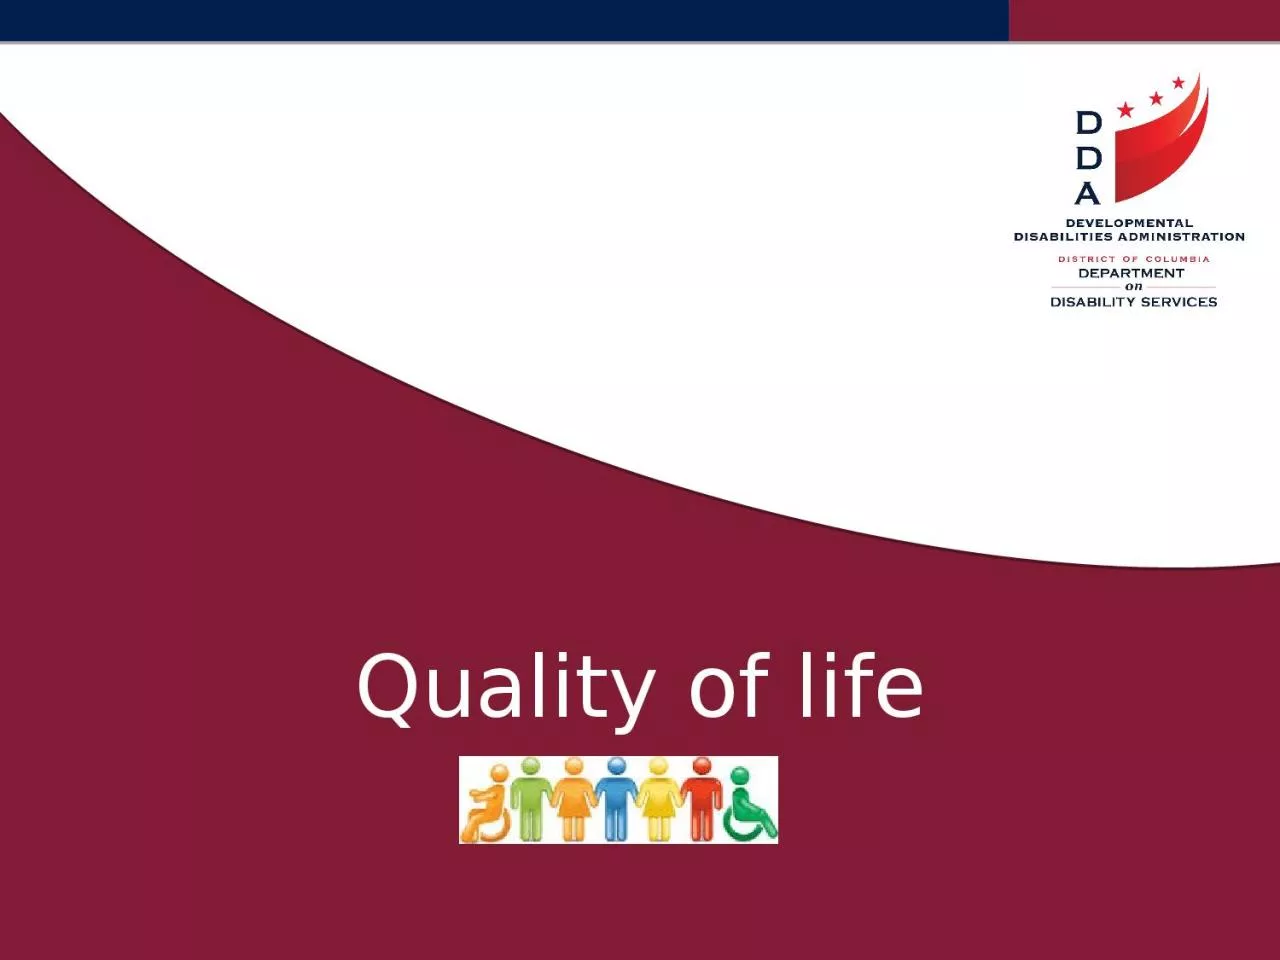 Quality of life Participants will learn the quality of life areas that DDS identifies